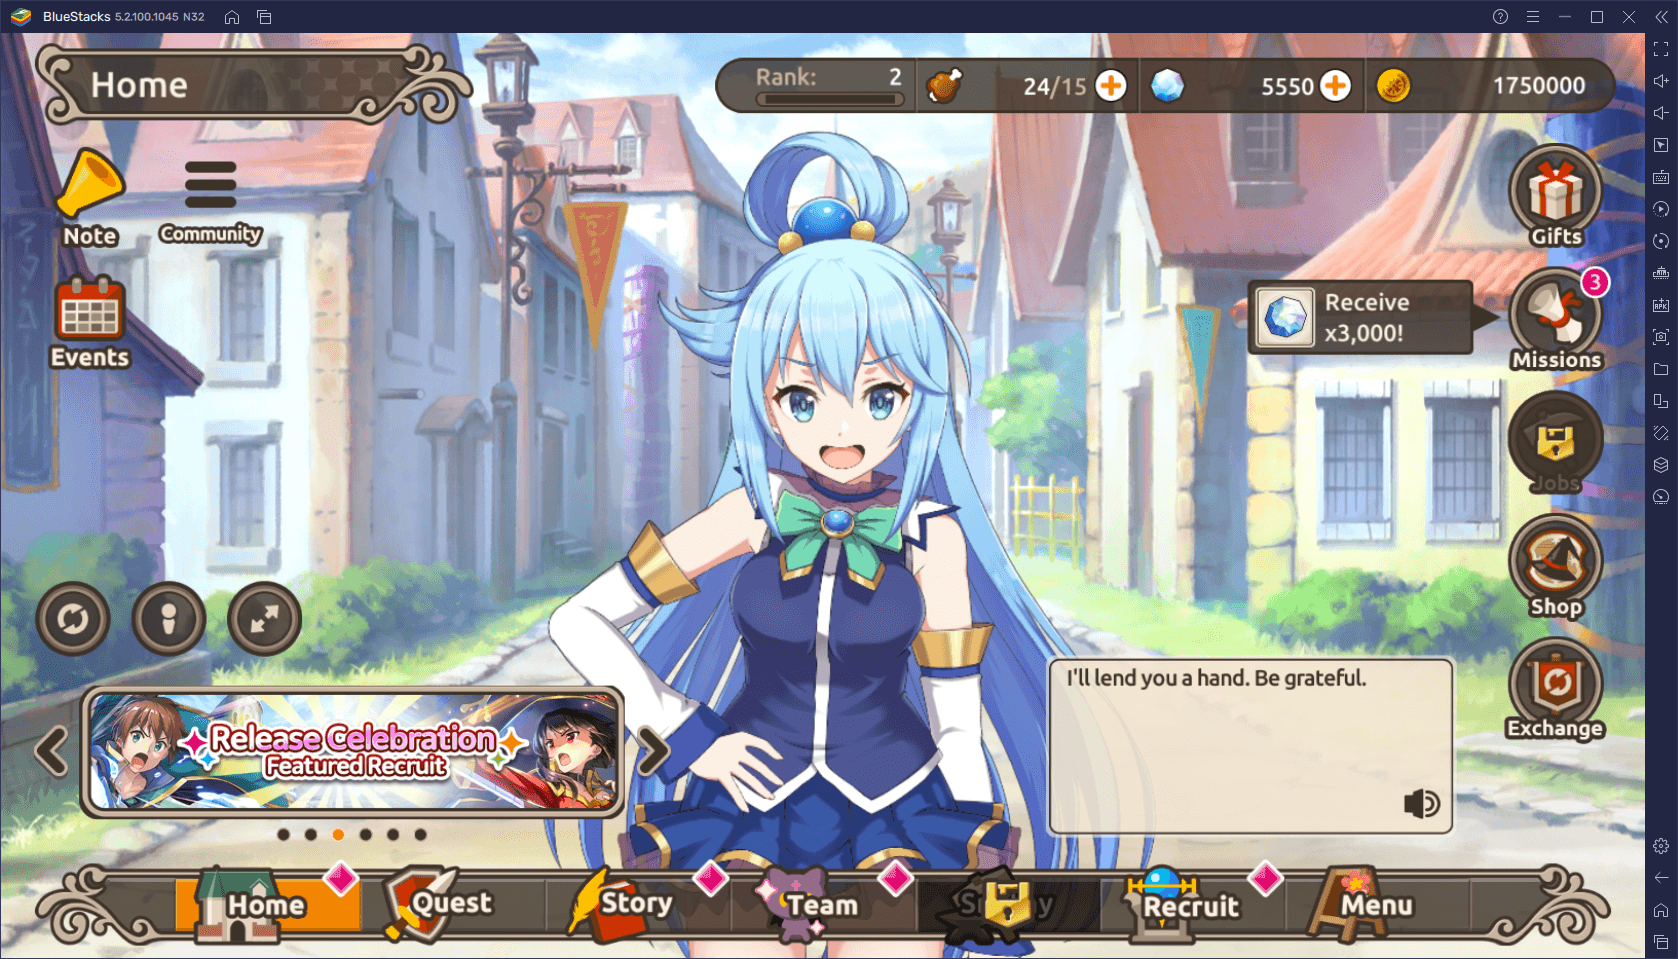 Download & Play KonoSuba: Fantastic Days on PC with NoxPlayer